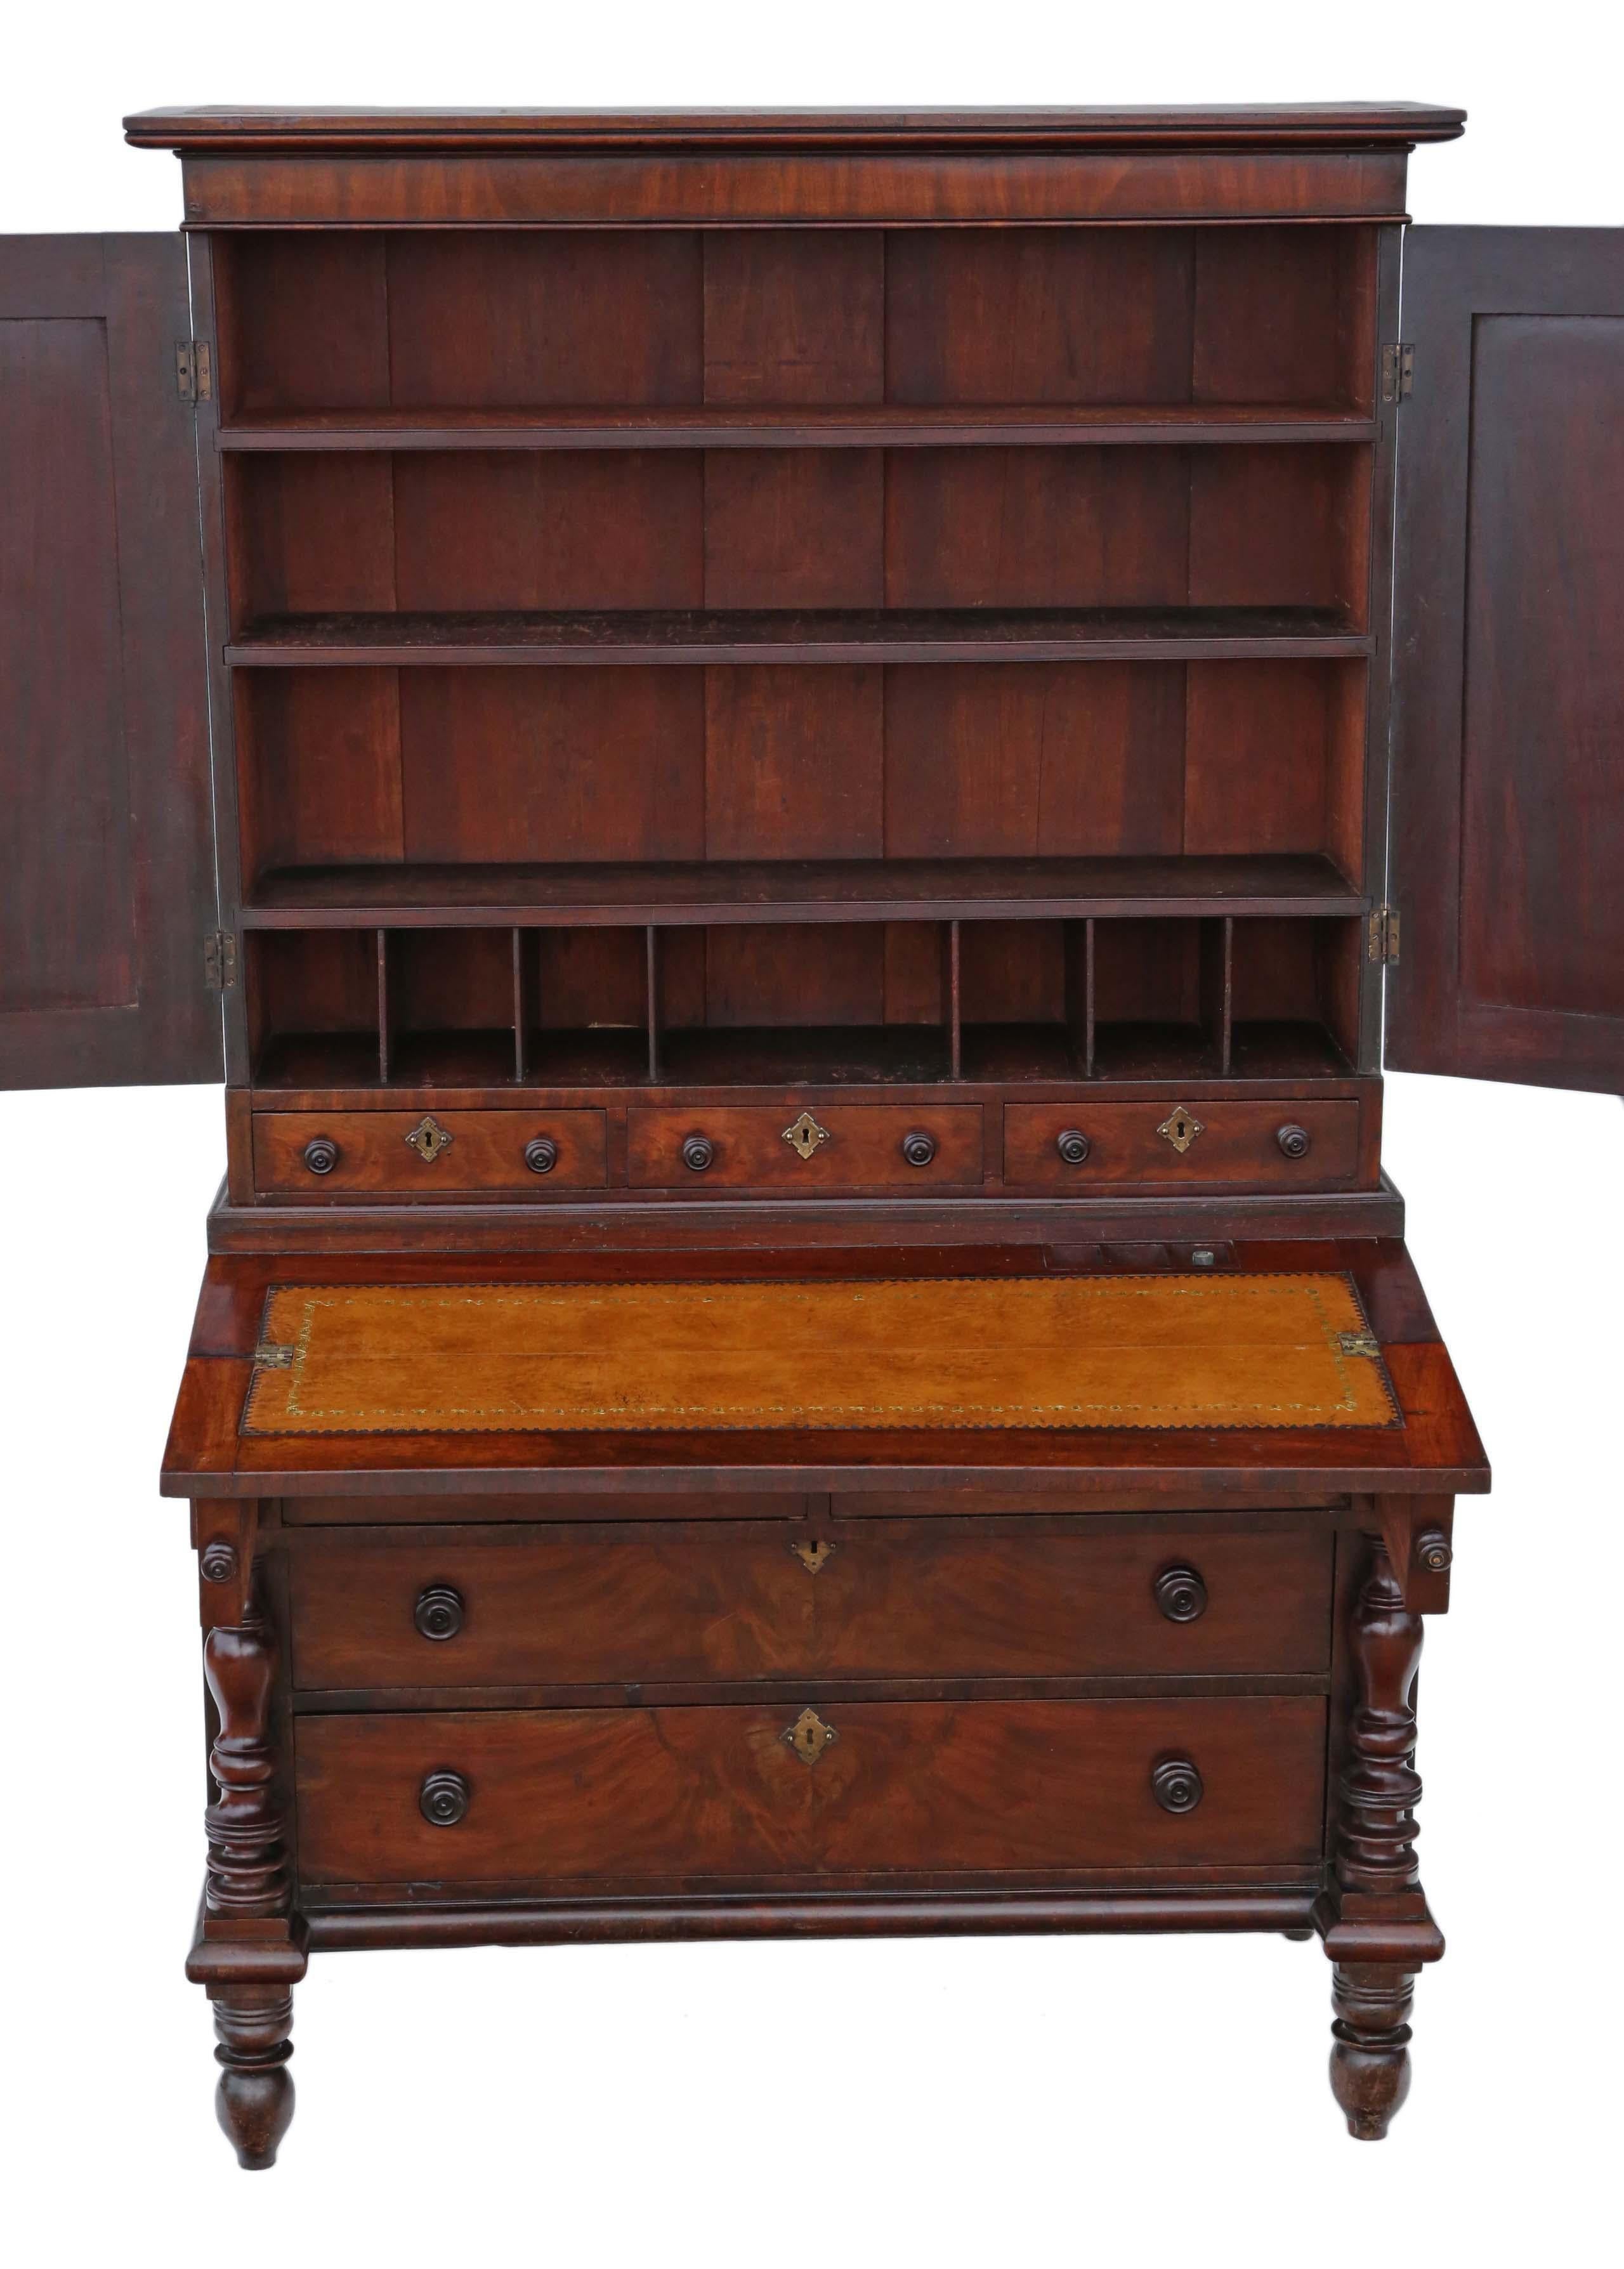 George III Antique High-Quality Mahogany Housekeeper's Cupboard with Secretaire, circa 1800 For Sale